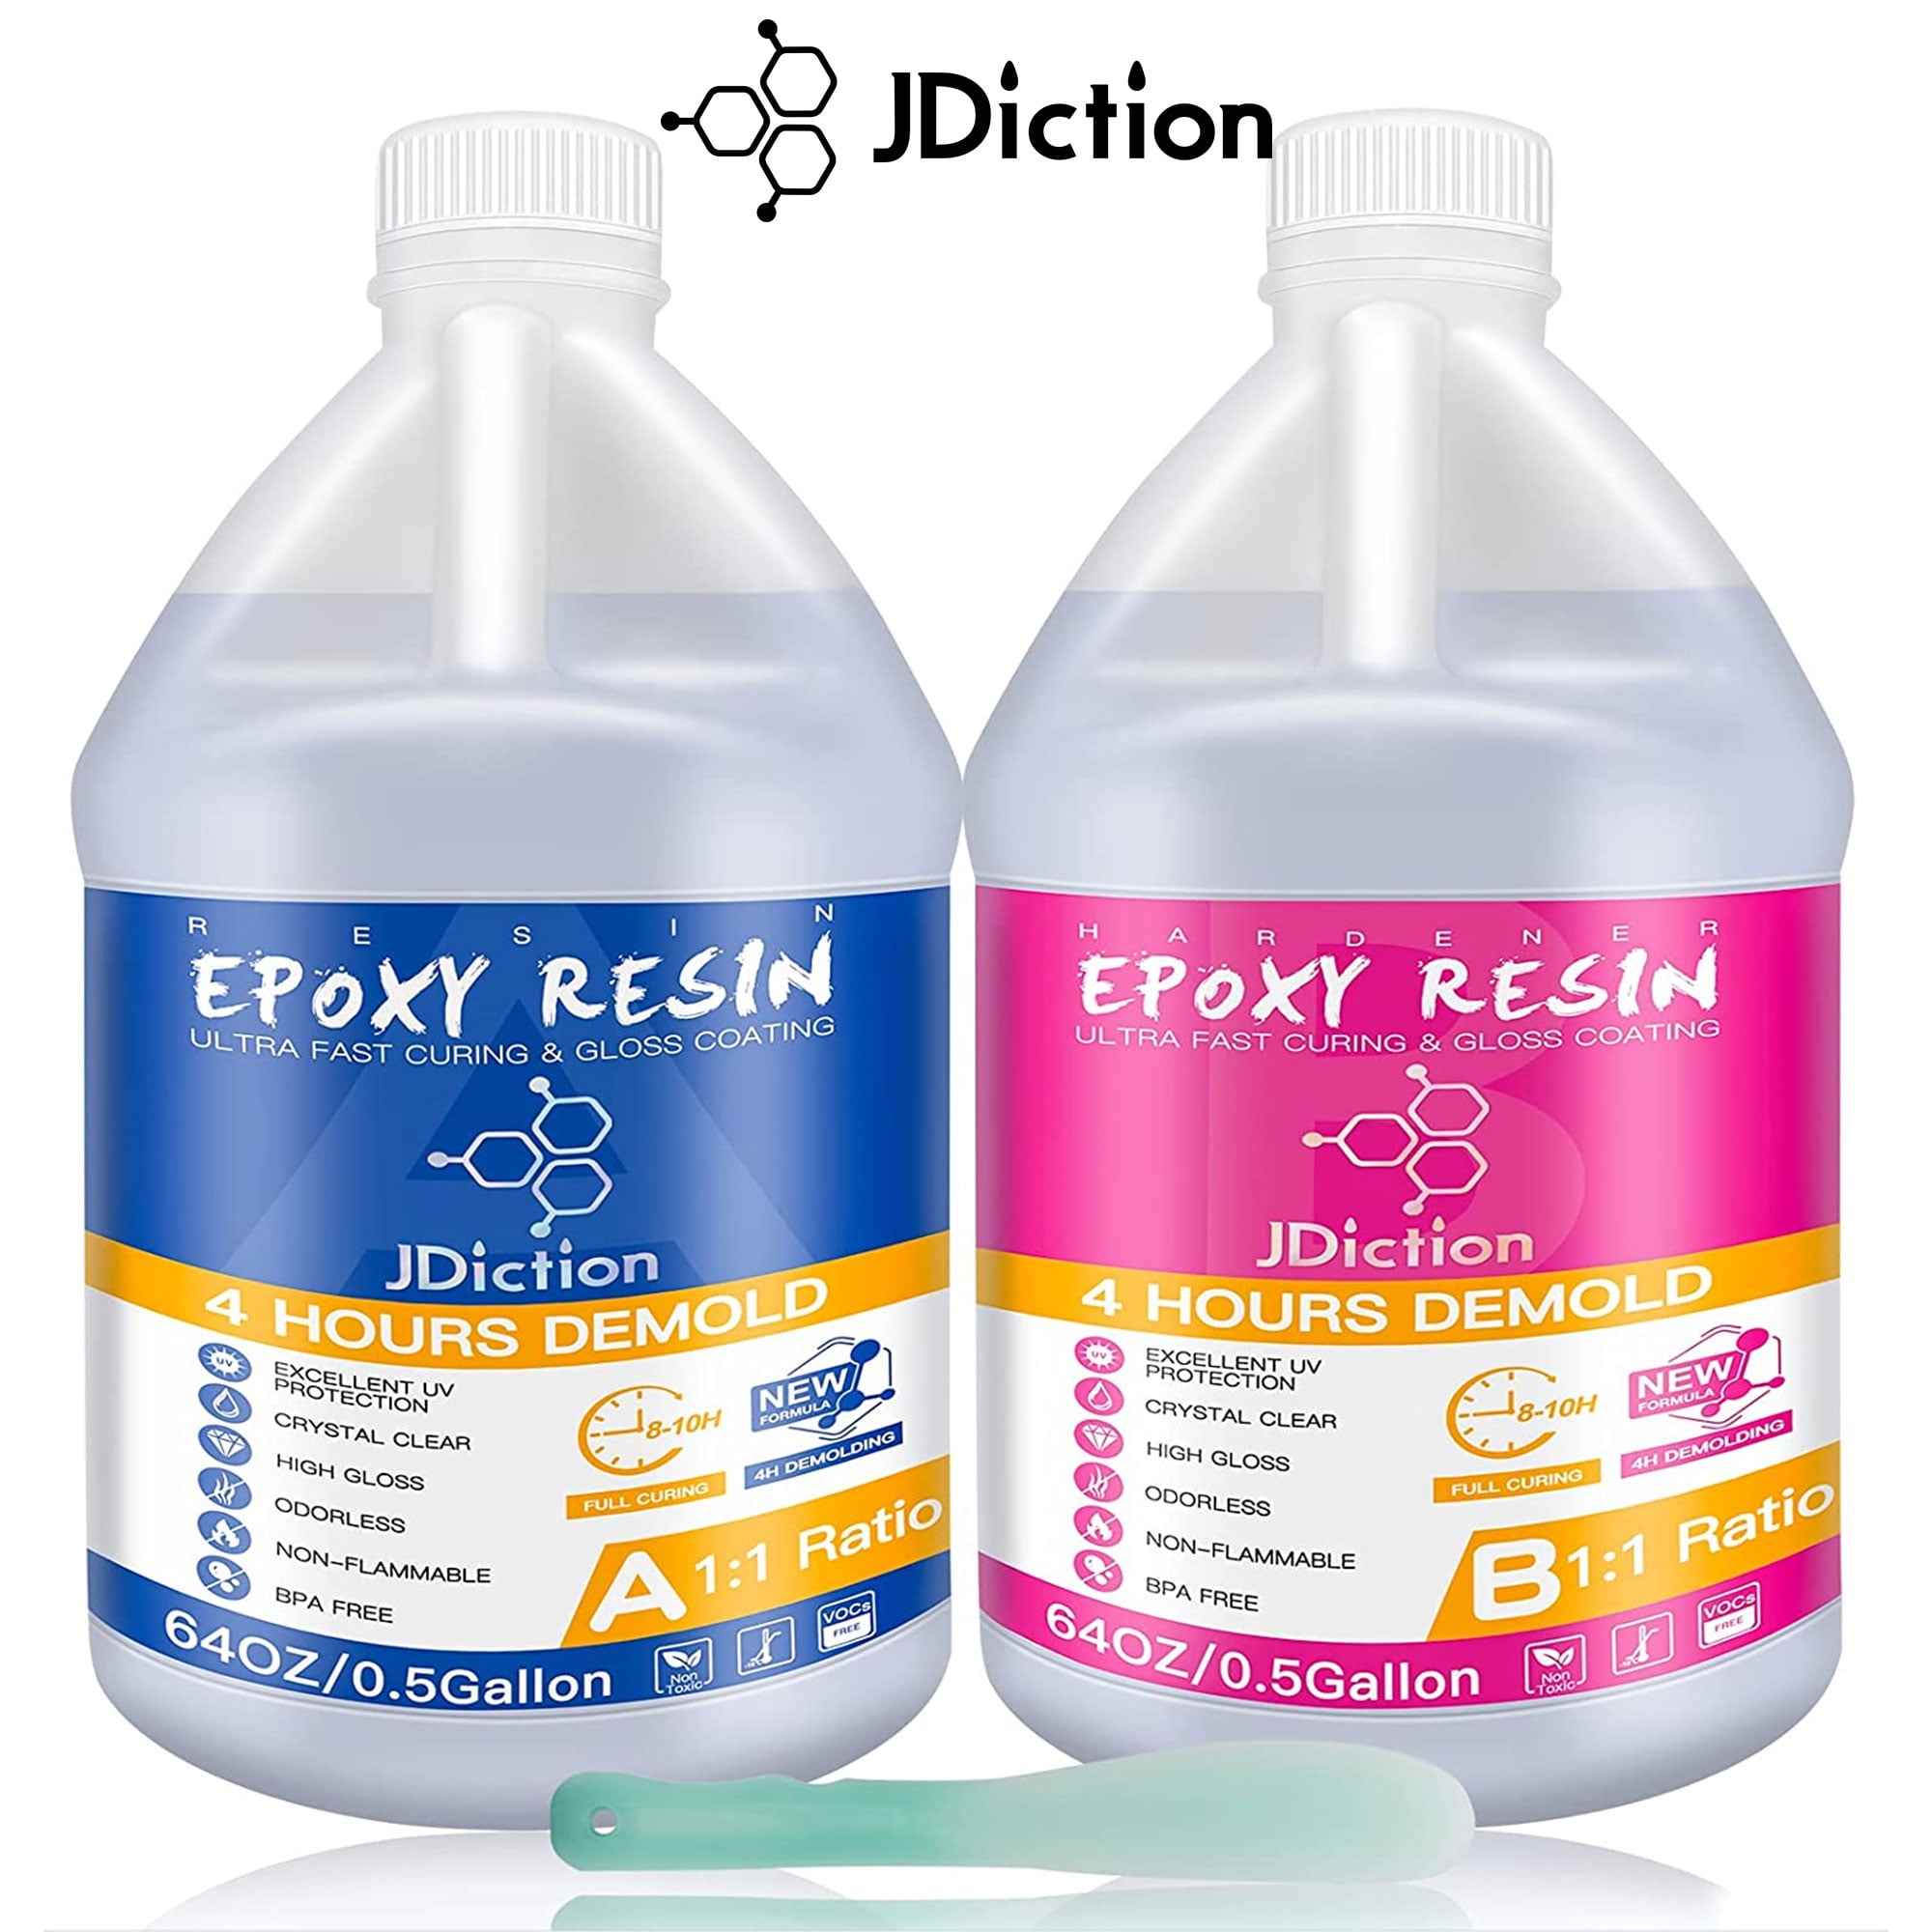 JDiction Epoxy Resin 1 Gallon Kit Clear Fast Curing-4 Hrs Demold, 8-10 Hrs  Full Curing 